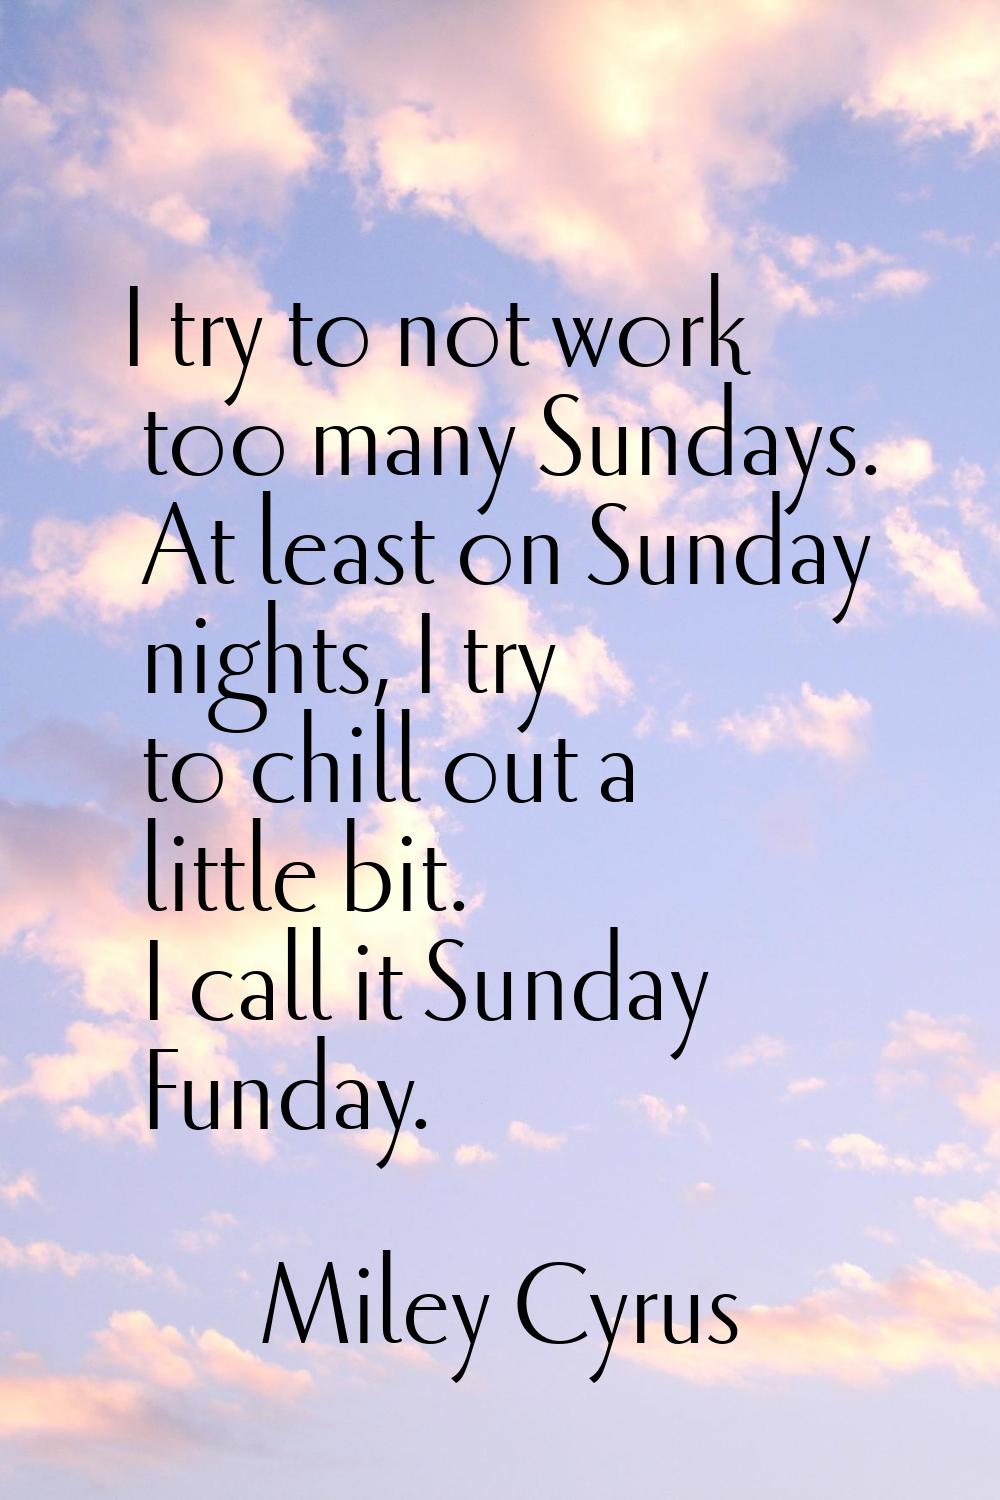 I try to not work too many Sundays. At least on Sunday nights, I try to chill out a little bit. I c